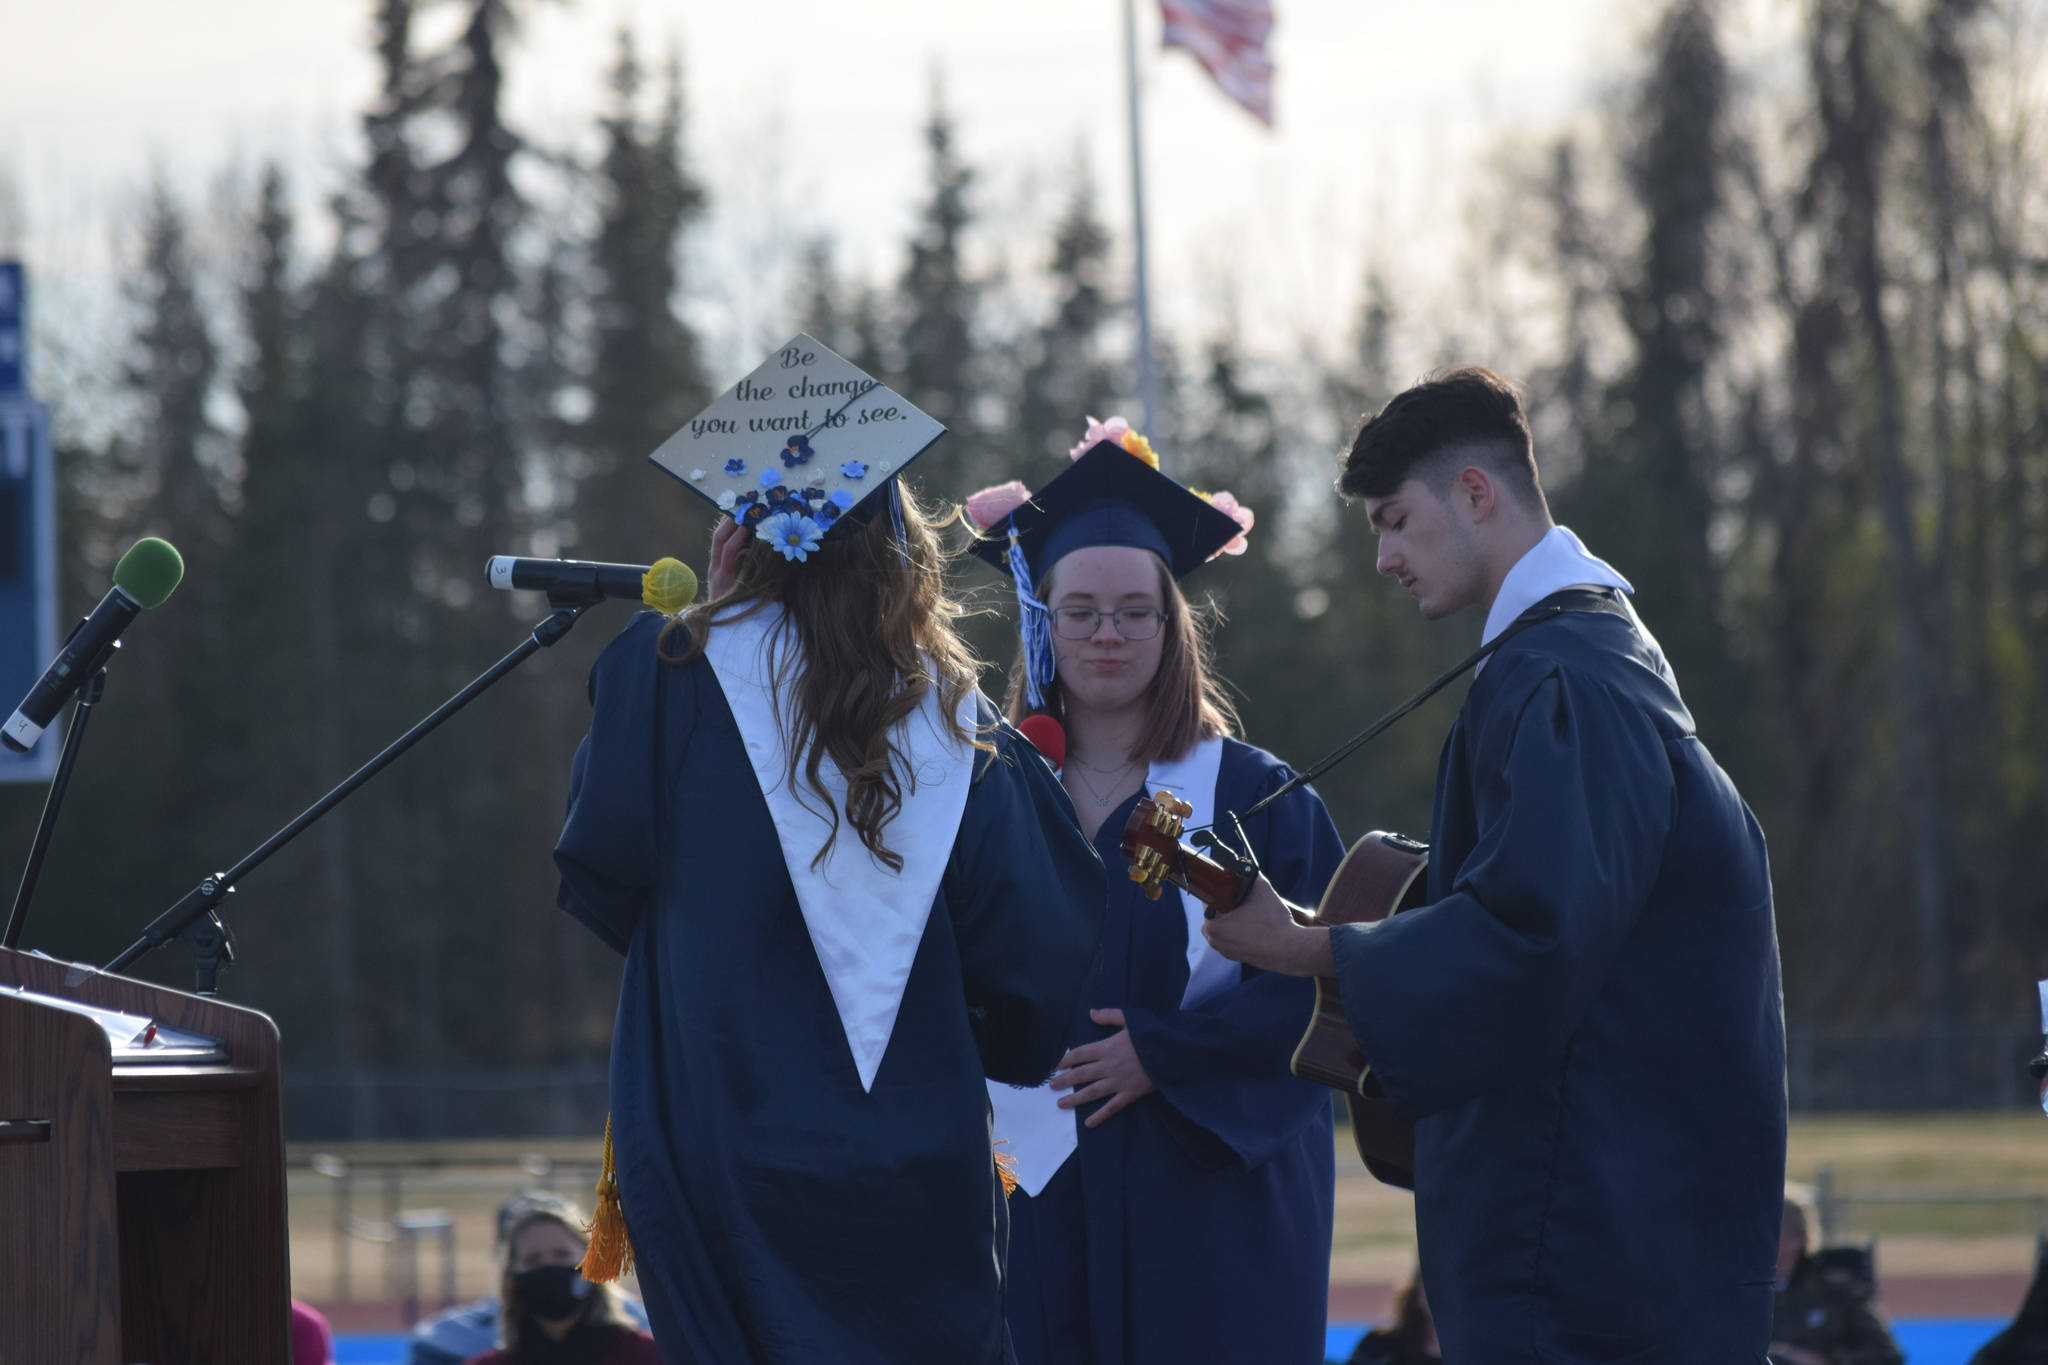 Soldotna High School students Katie Delker, Brittany Lewis and Isaac Nagasako perform at their graduation on Tuesday, May 18, 2021 at the high school football field. (Camille Botello / Peninsula Clarion)